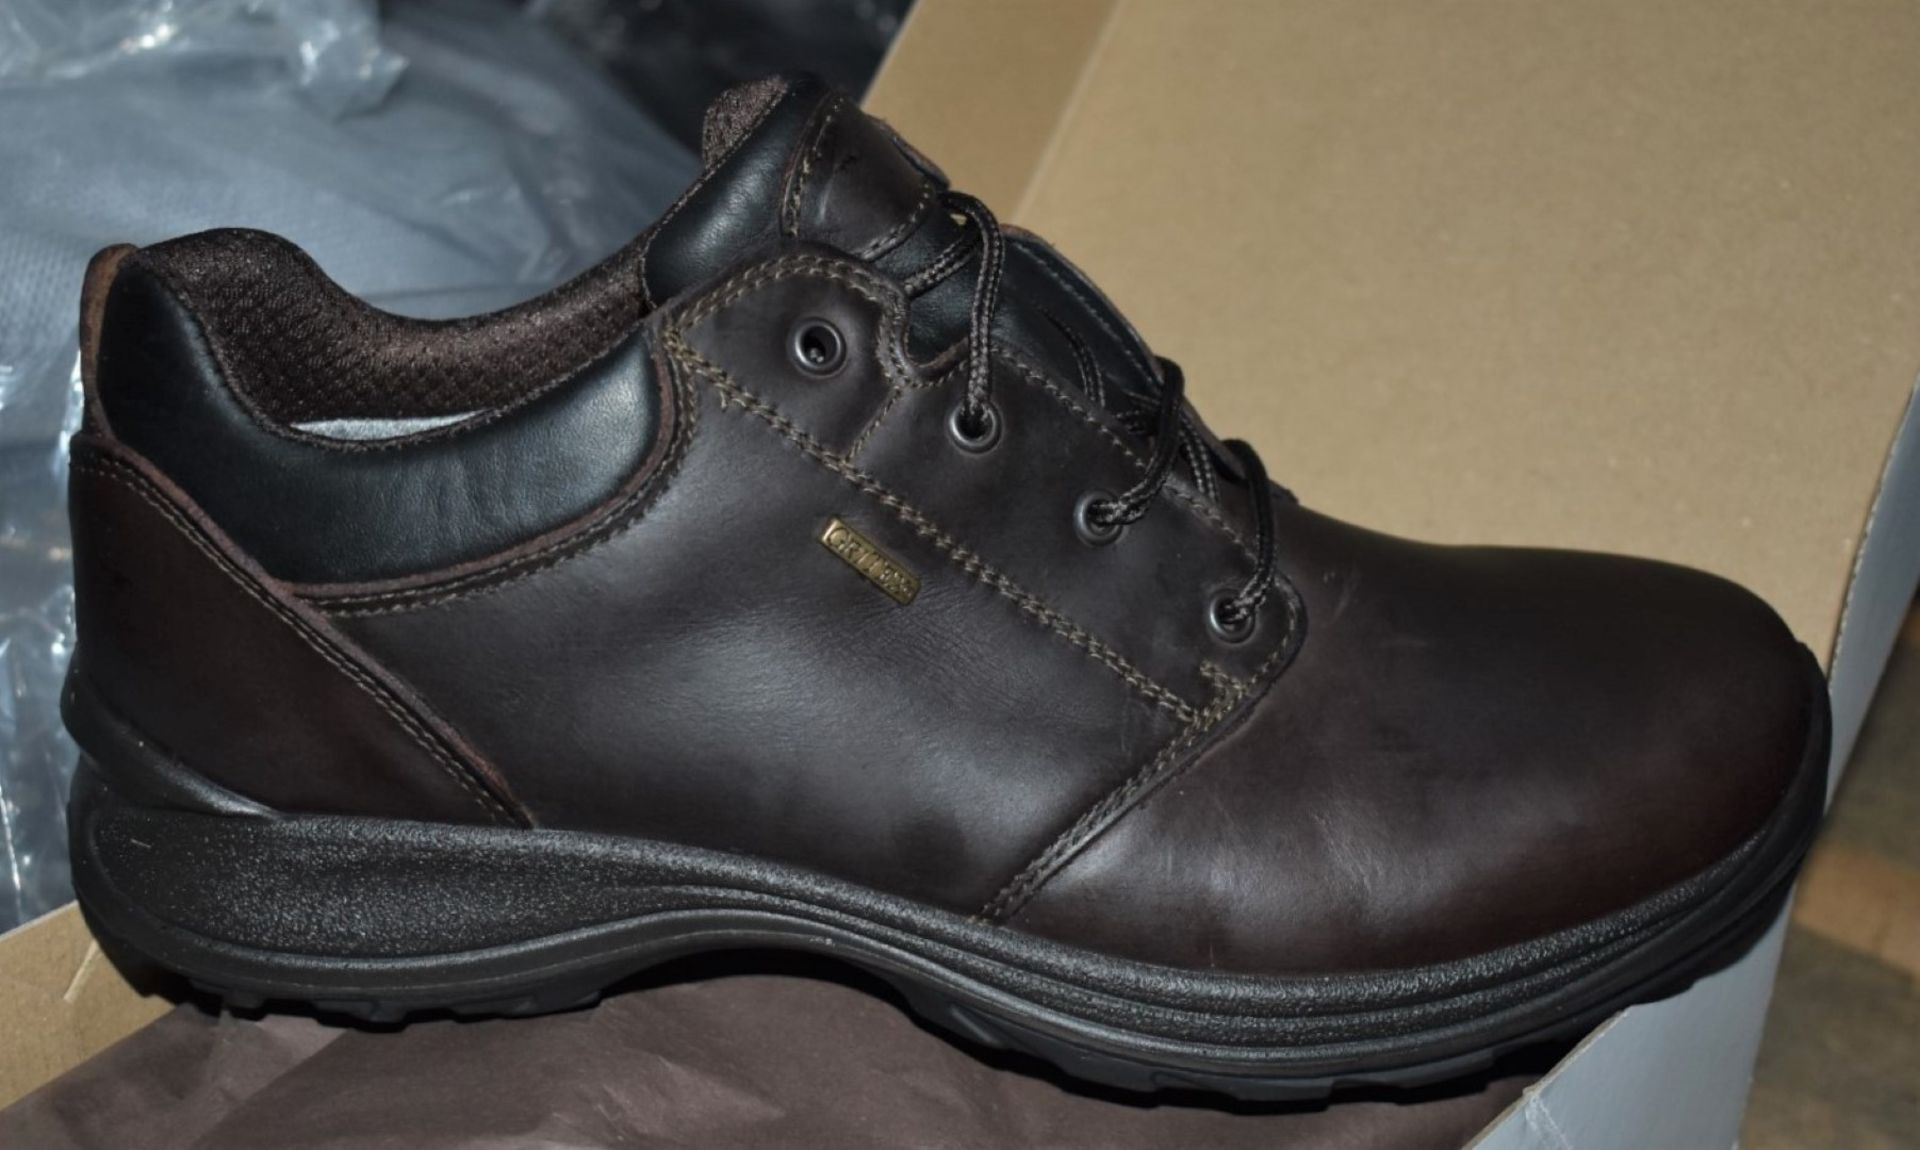 1 x Pair of Men's Grisport Brown Leather GriTex Shoes - Rogerson Footwear - Brand New and Boxed - - Image 2 of 9